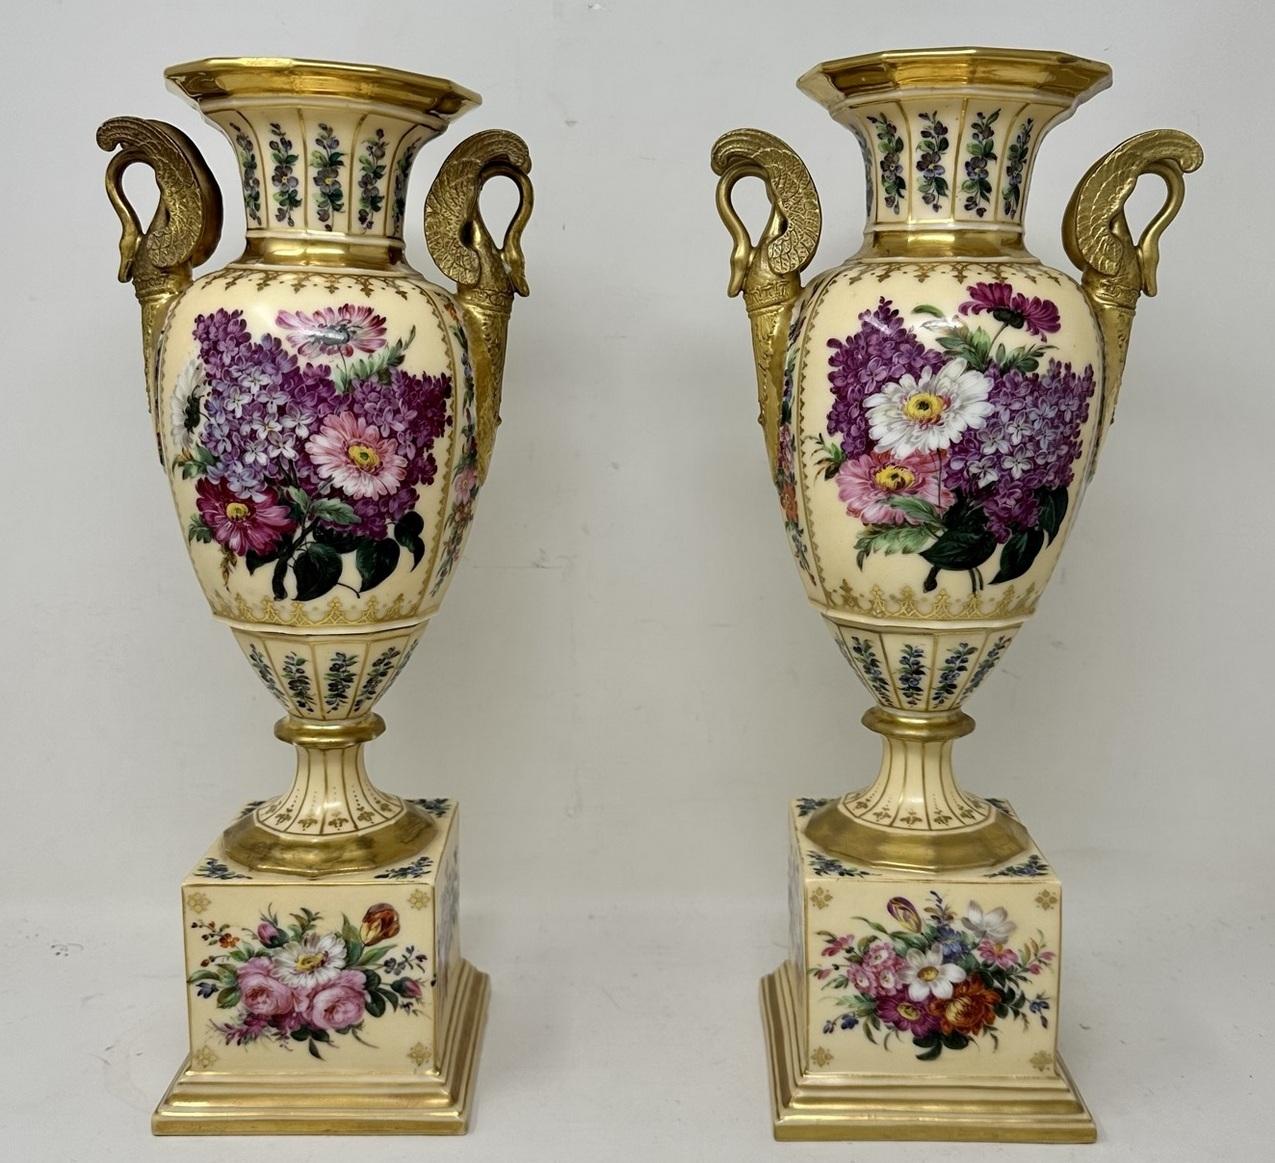 An Imposing and Stunning Pair French Sevres style Soft Paste Hand Decorated pale yellow ground Porcelain and gilt mounted twin swan neck scroll handle Table or Mantle Urns of traditional form, of outstanding quality and quite generous proportions,